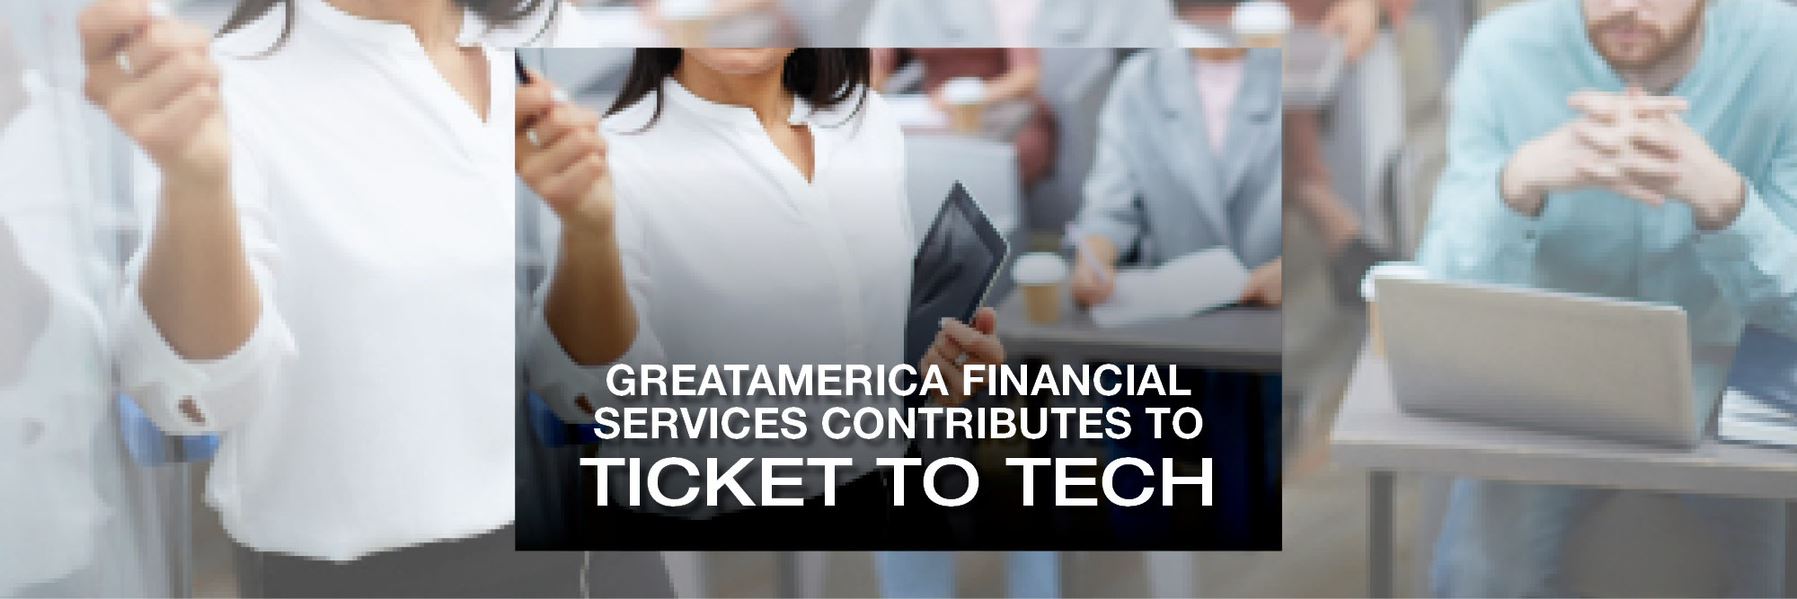 GreatAmerica Contributes to Ticket to Tech